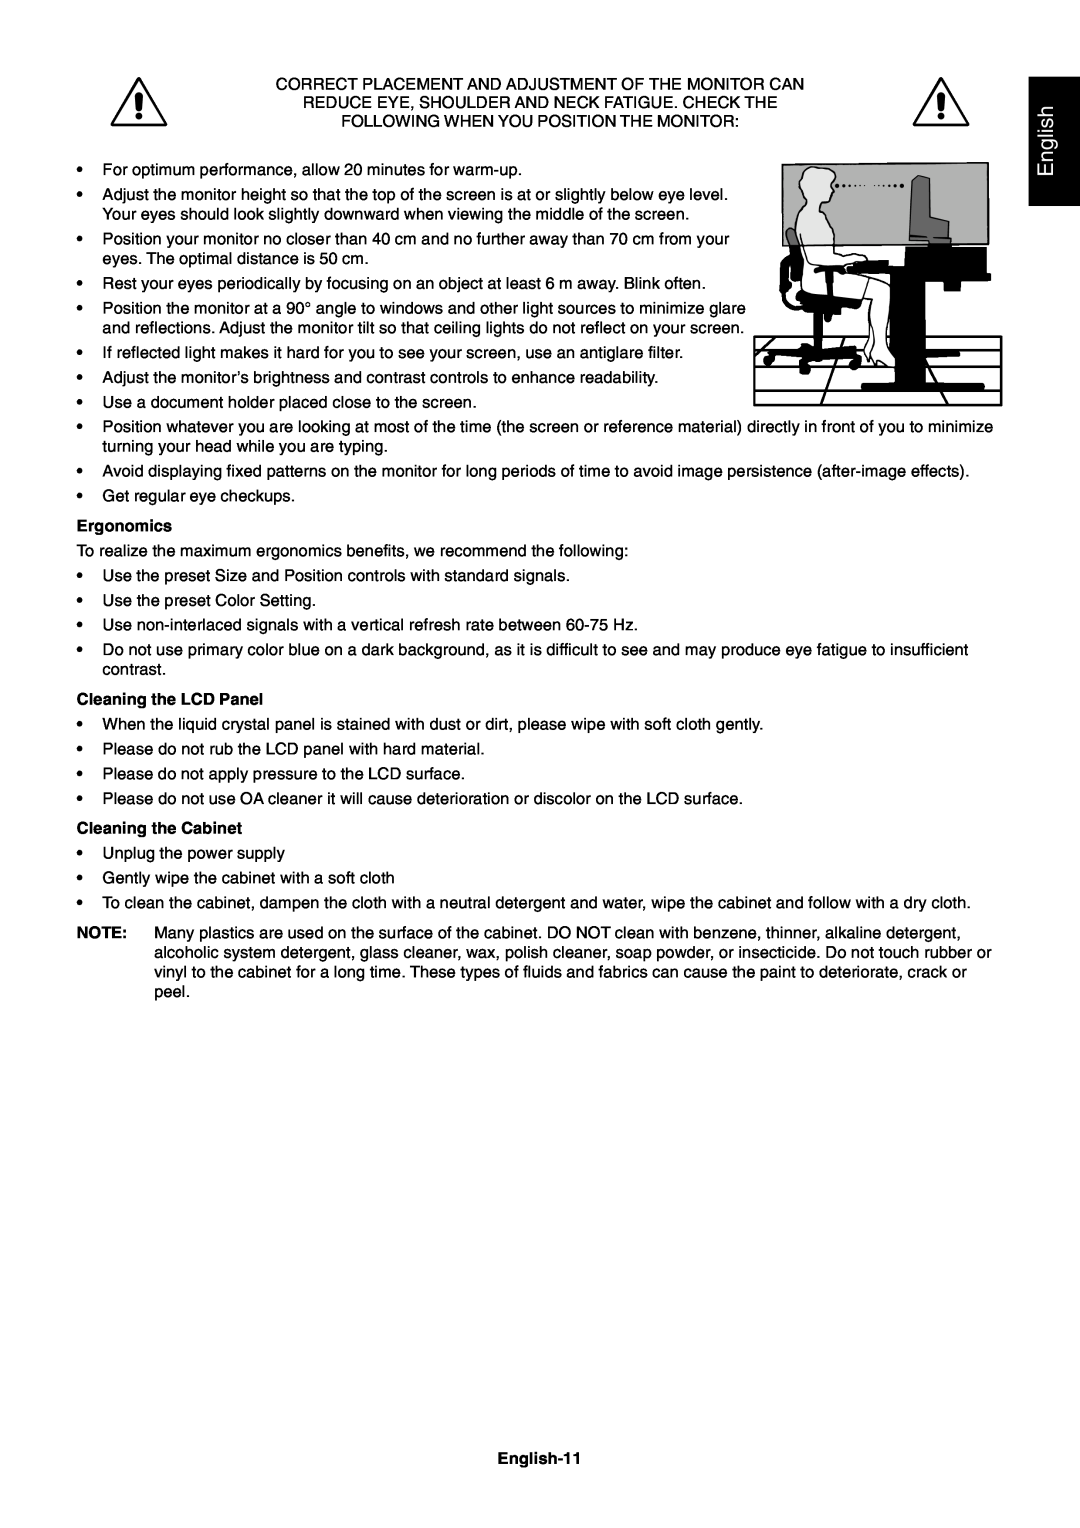 NEC LCD225WNXM, LCD205WNXM user manual Ergonomics, Cleaning the LCD Panel, Cleaning the Cabinet, English-11 